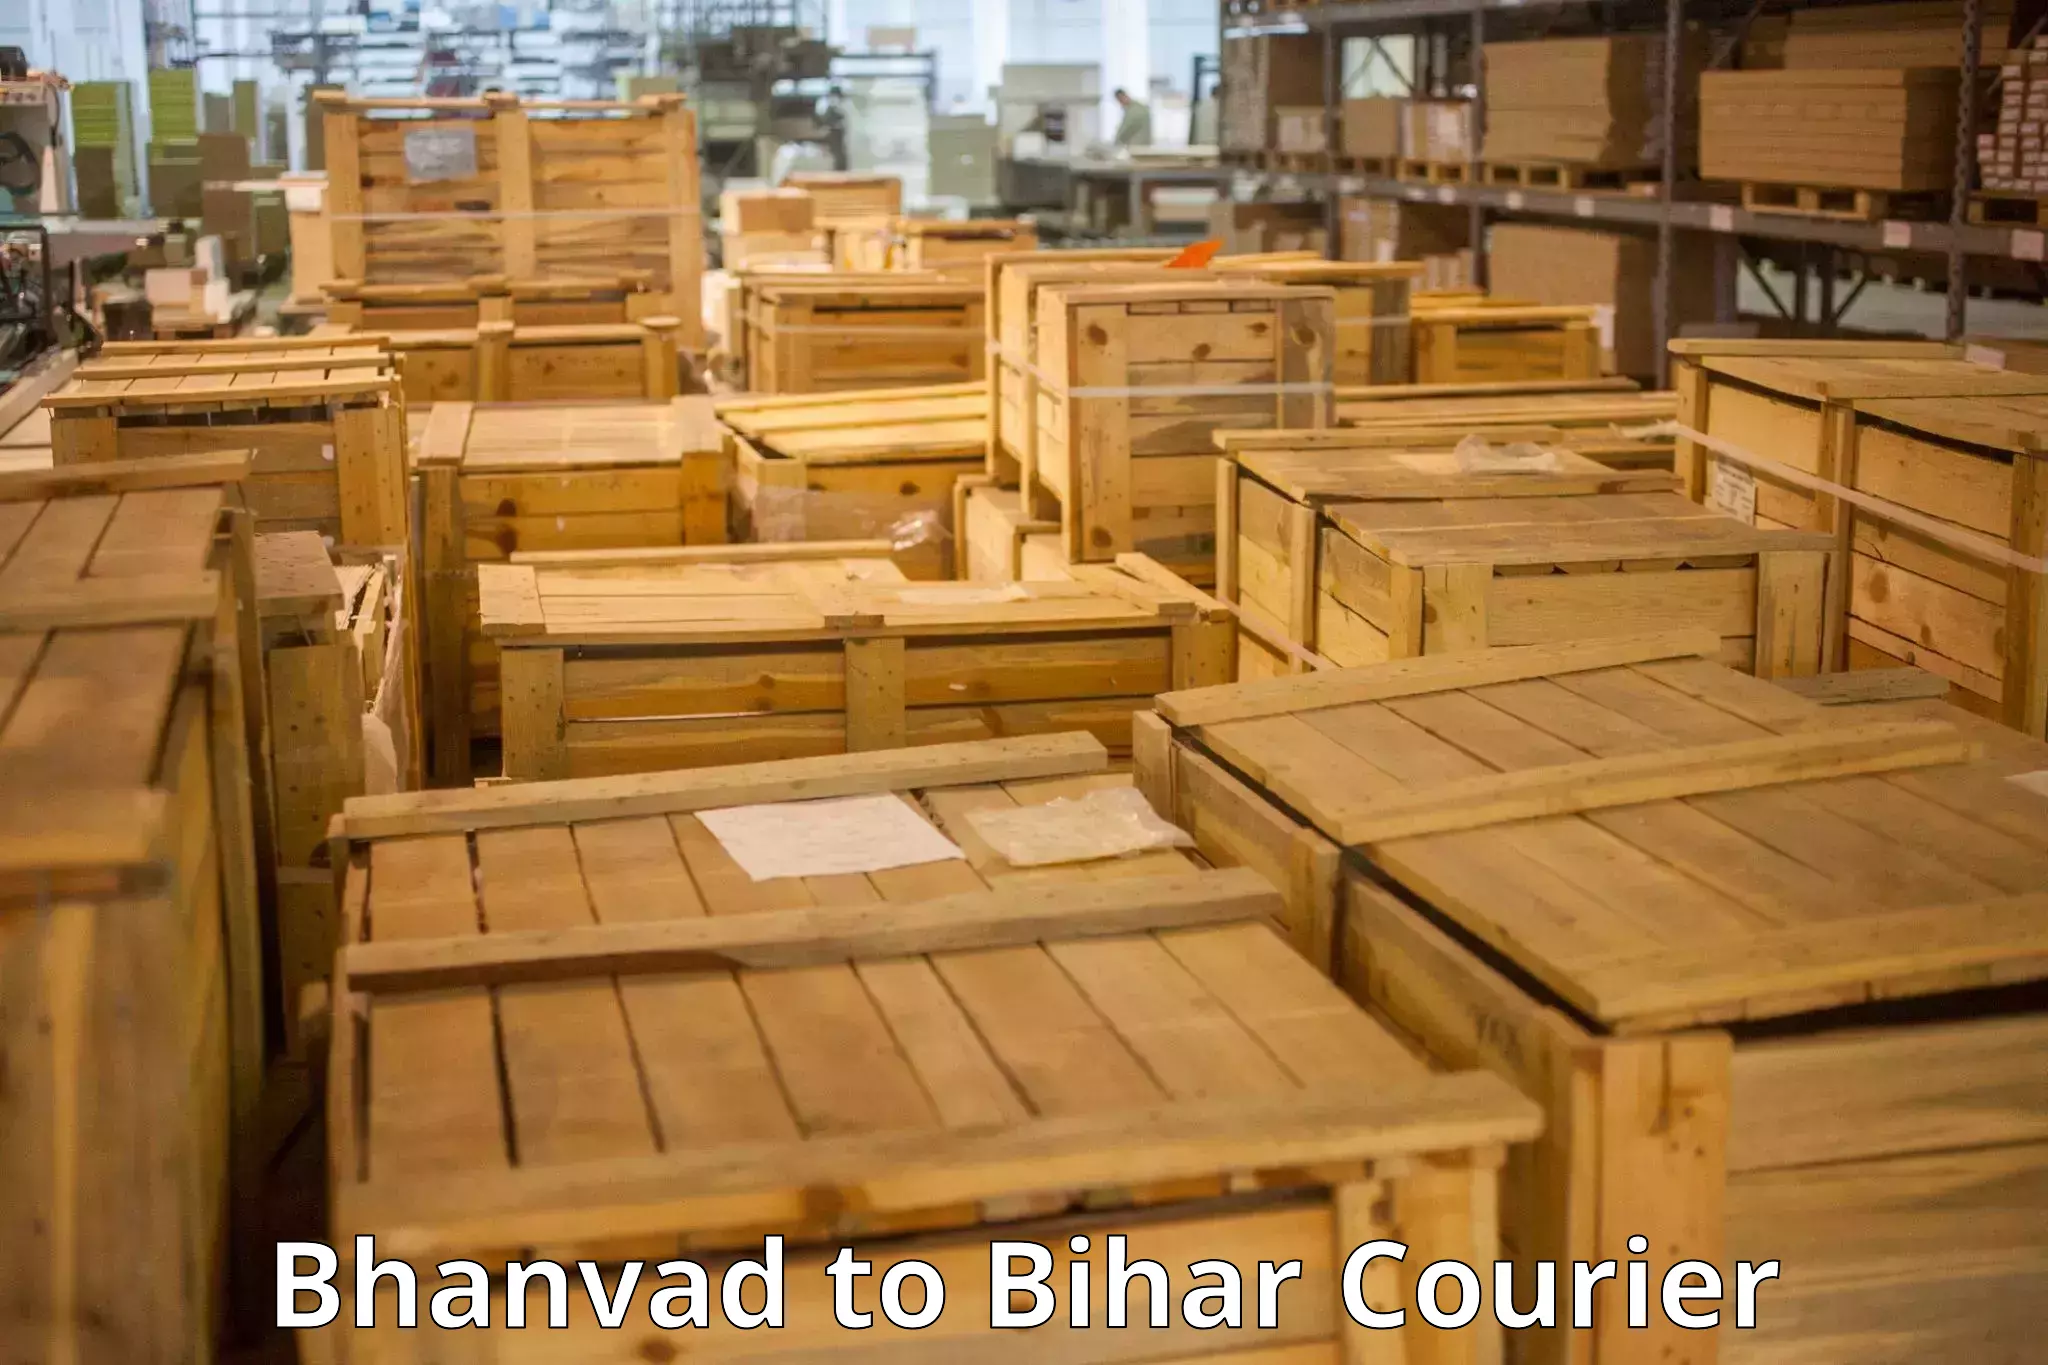 Luggage transport consulting Bhanvad to Mahnar Bazar